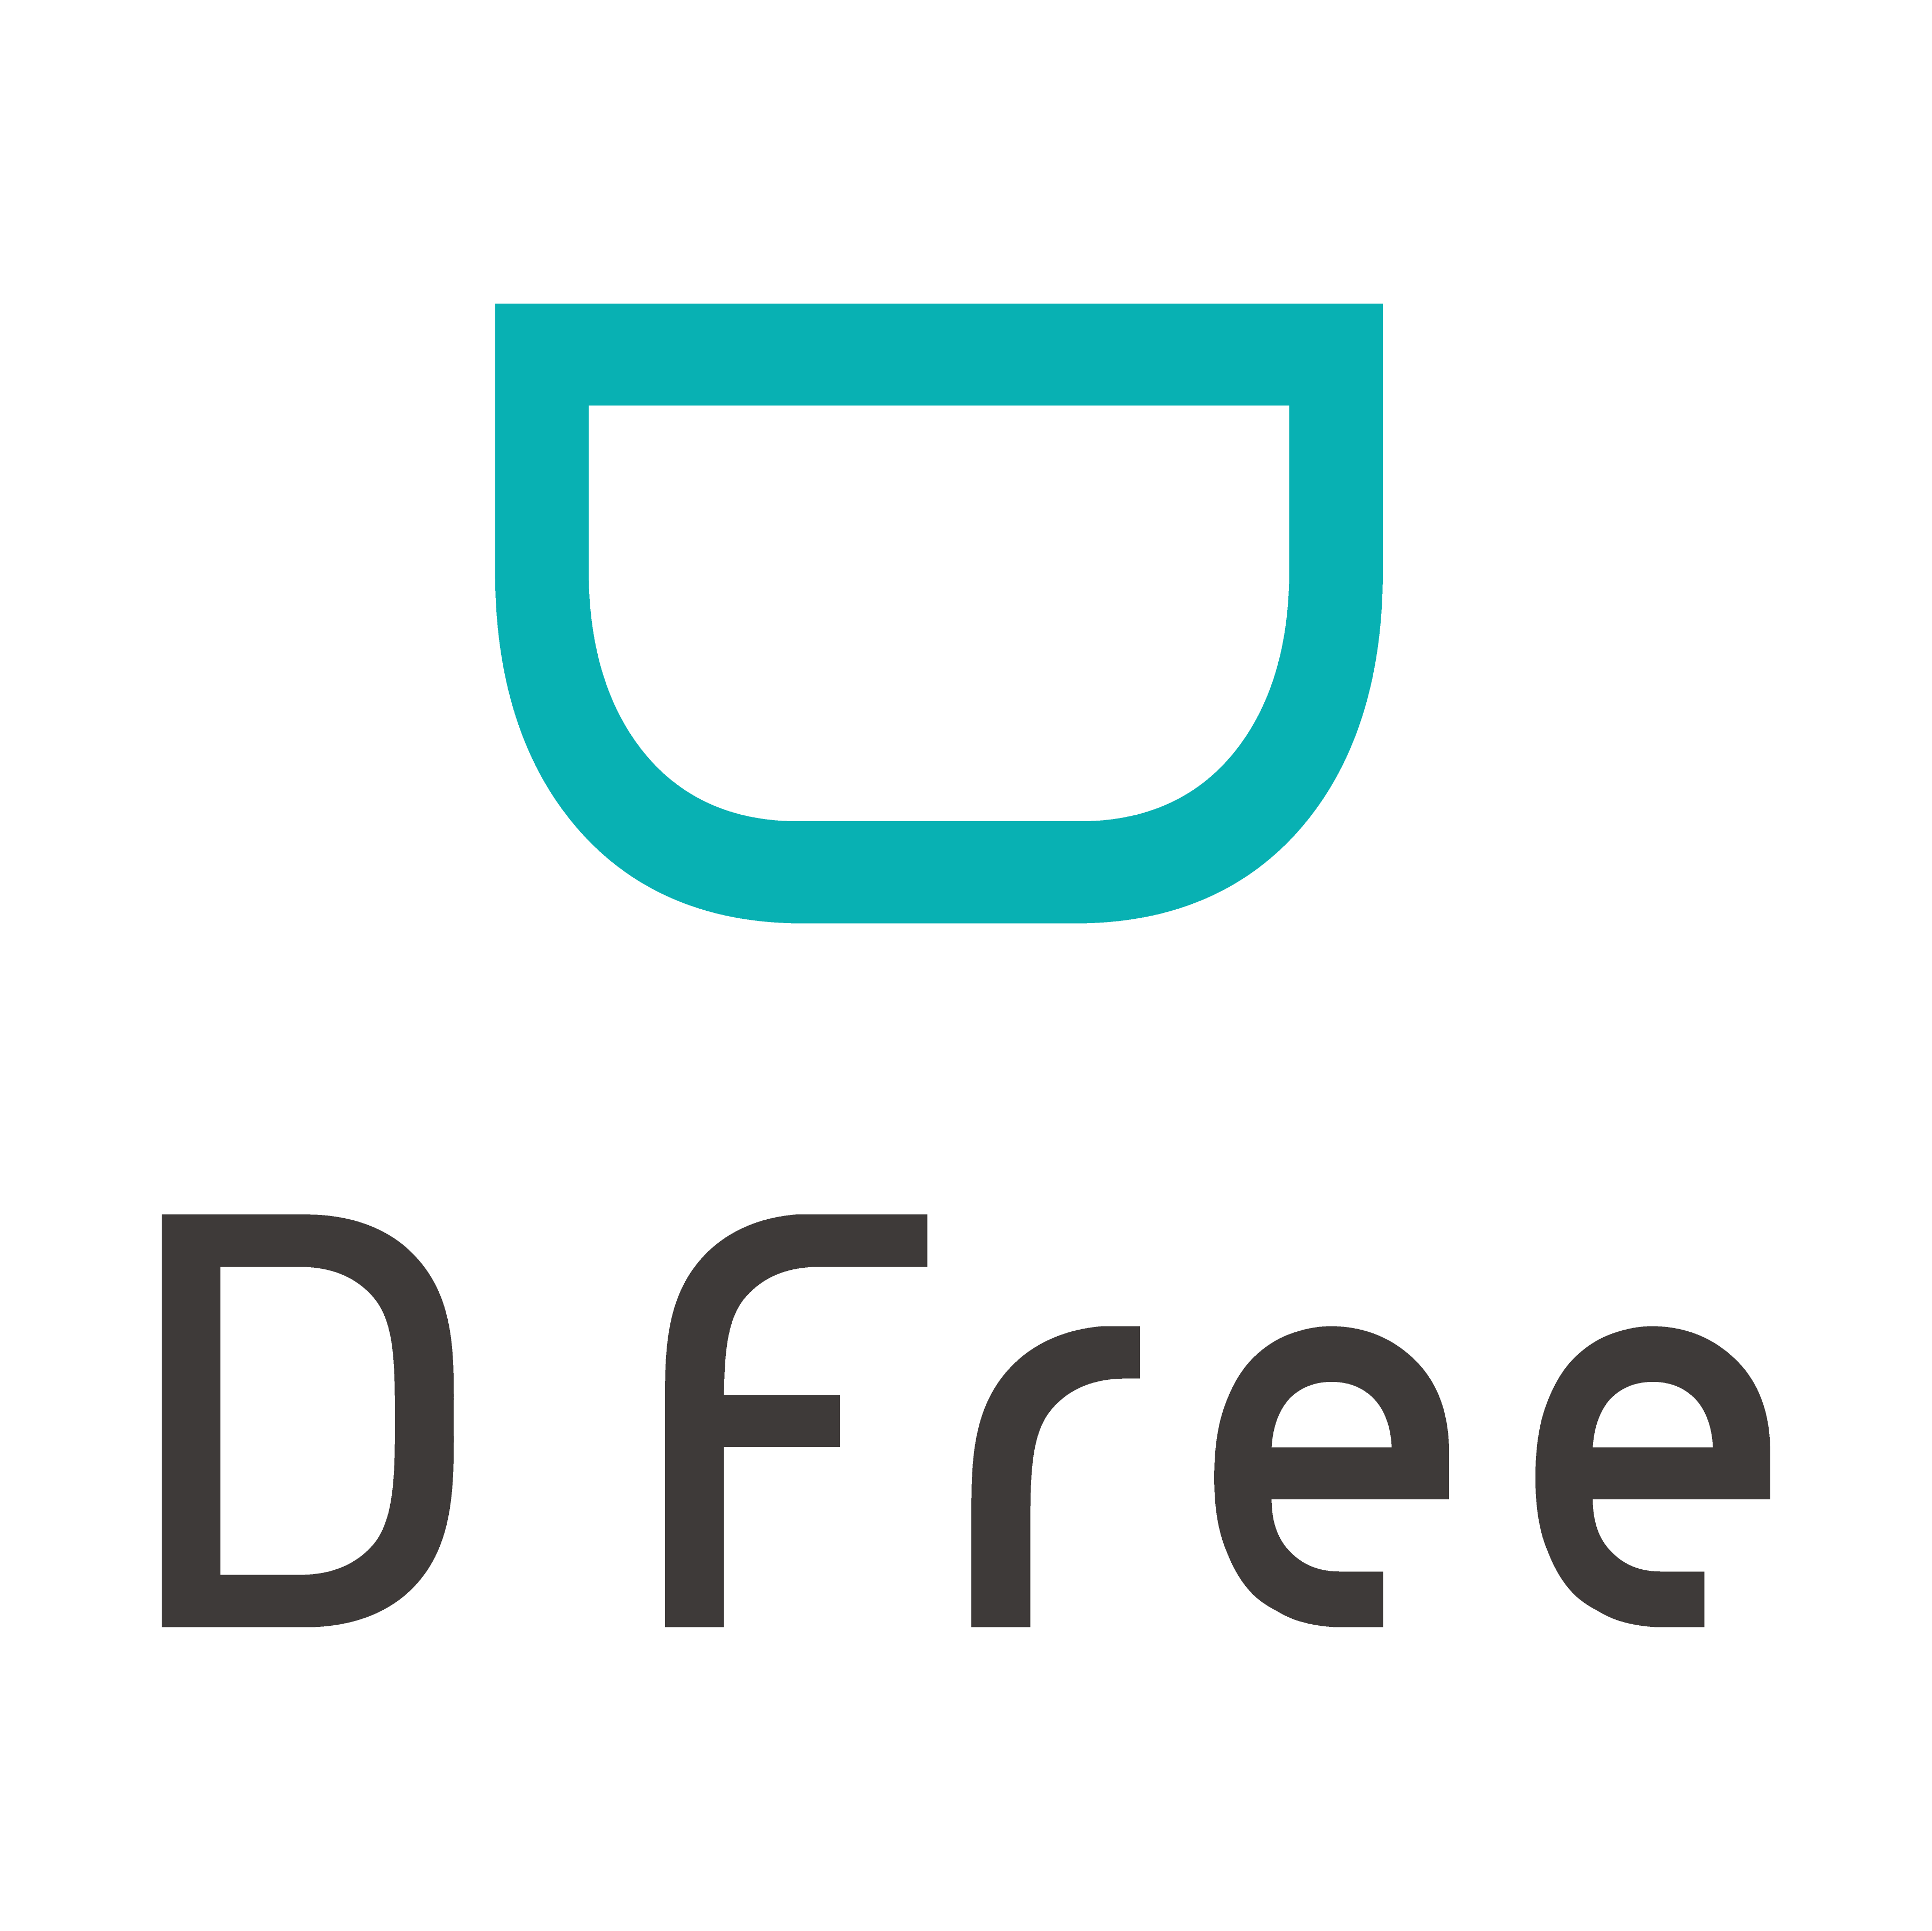 DFree® logo. DFree stands for “diaper-free.”